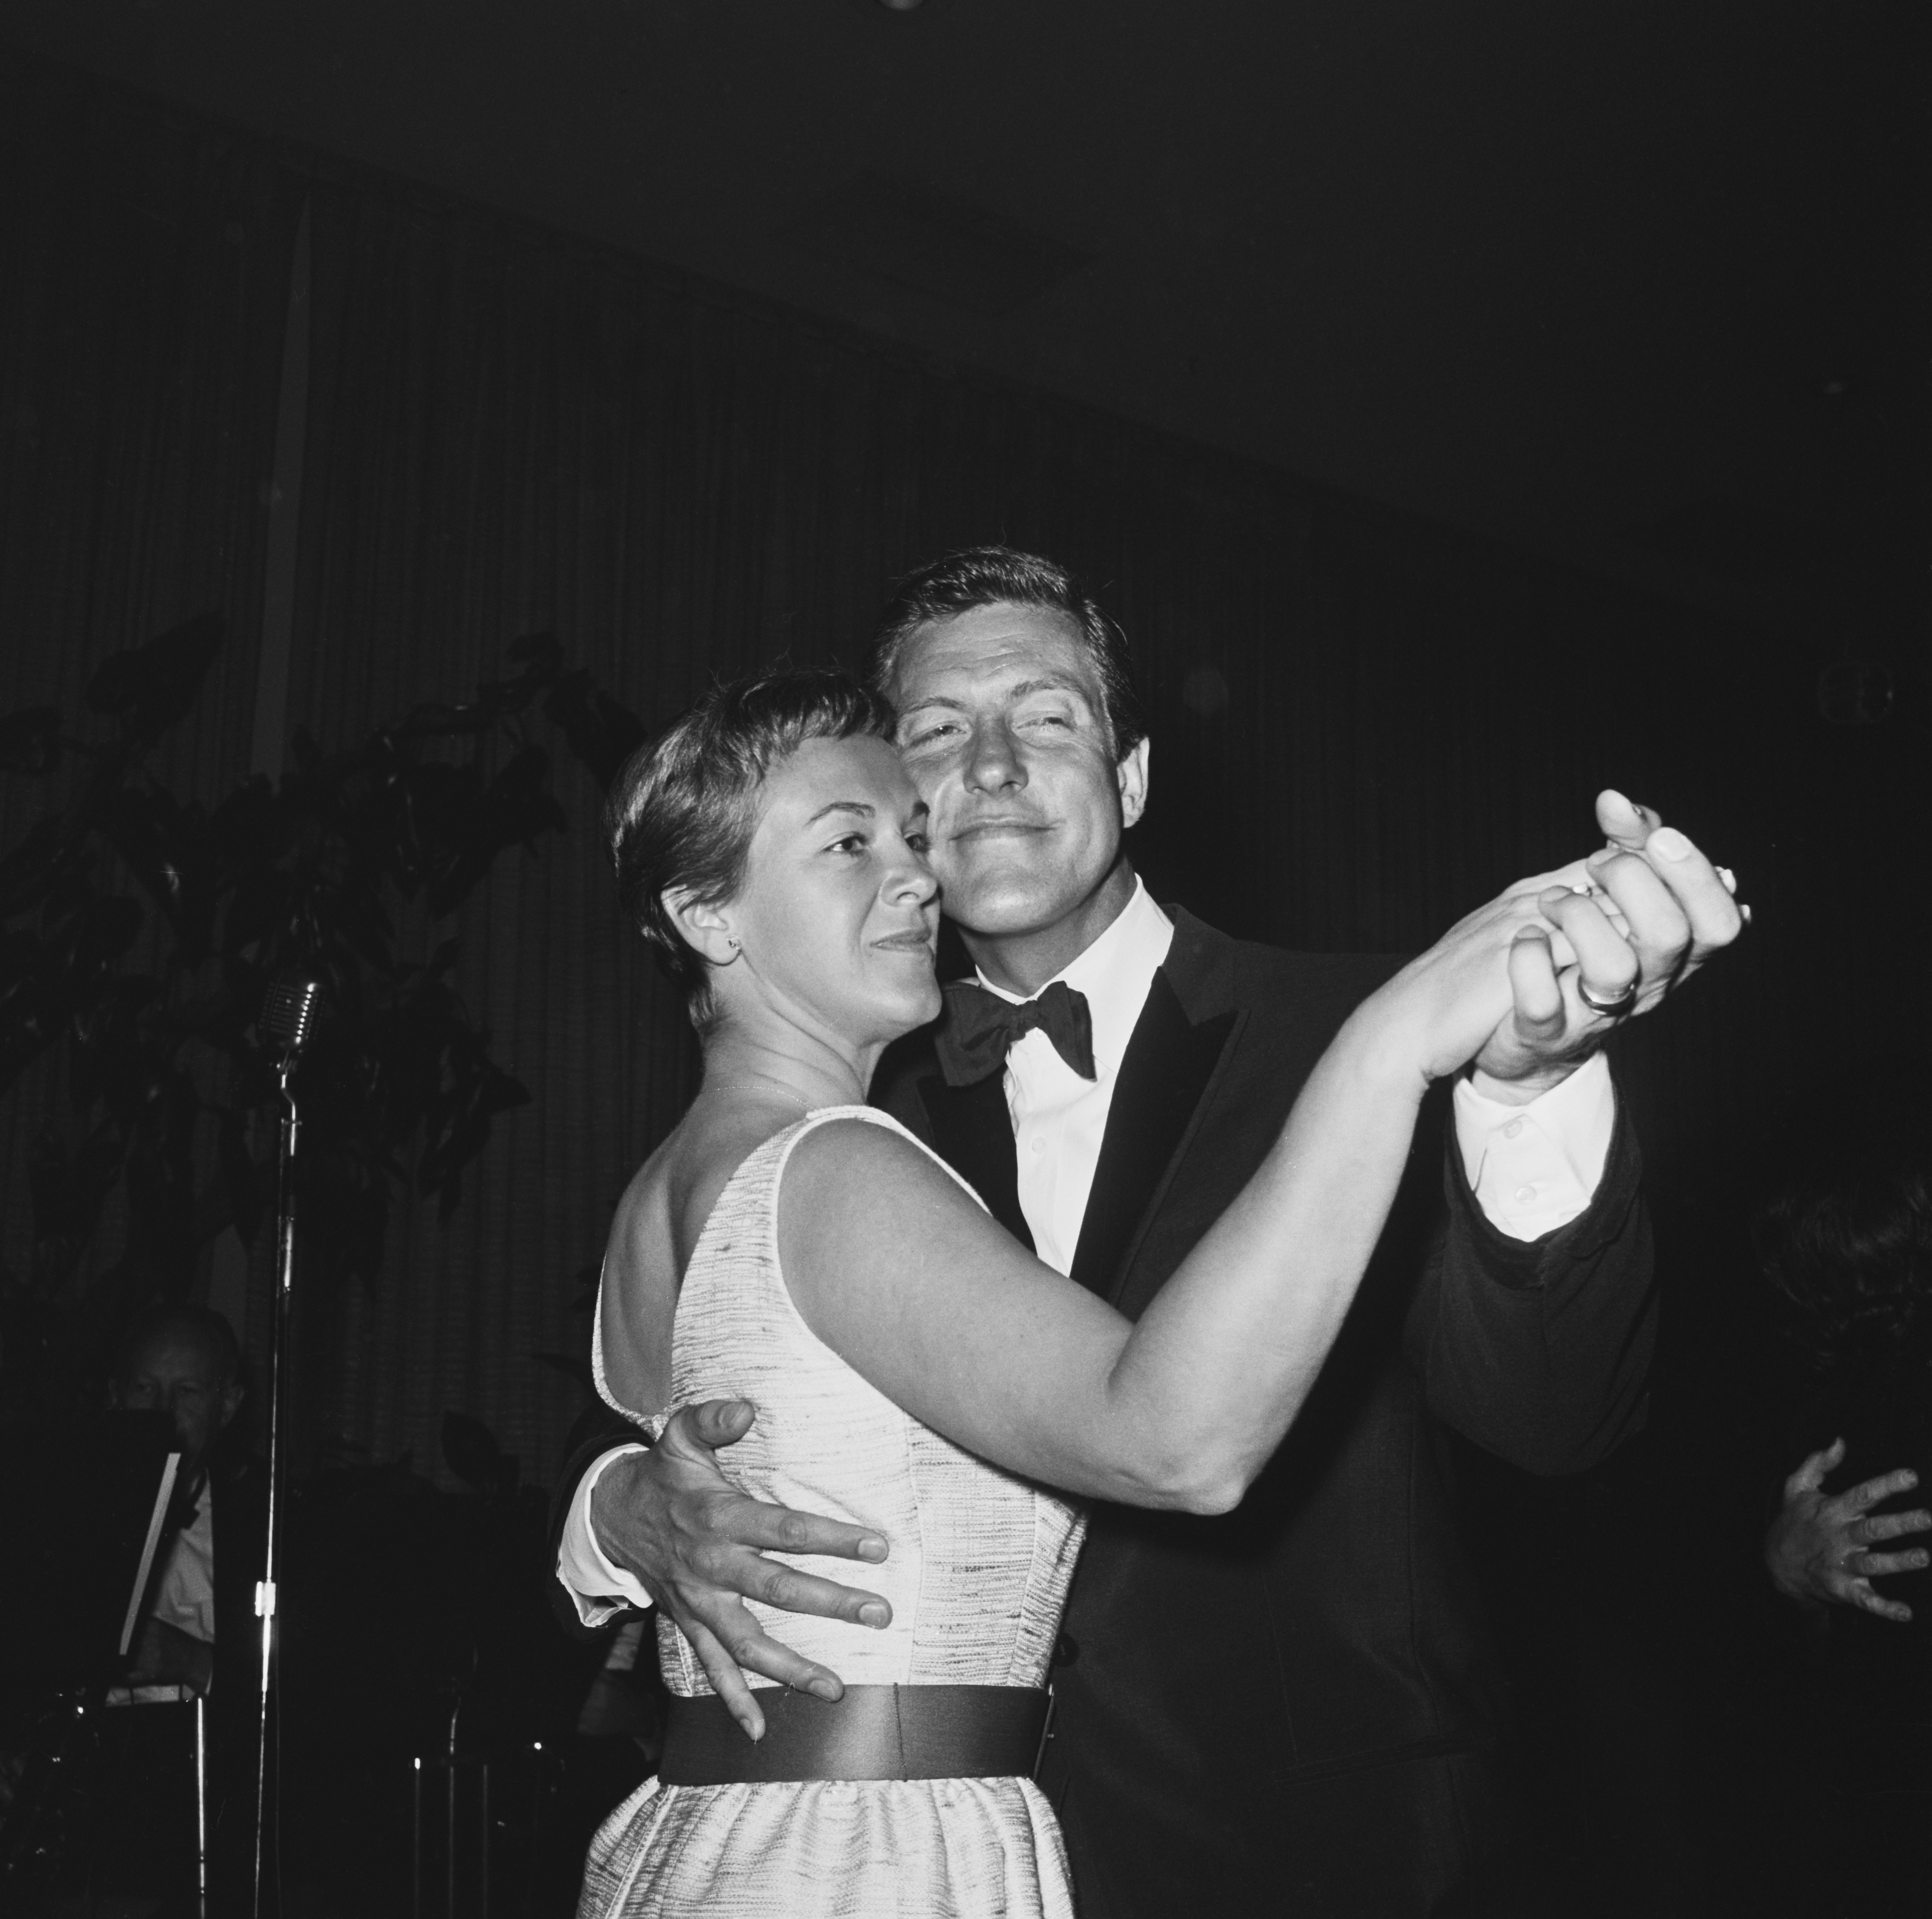 American actor, comedian and singer Dick Van Dyke dancing with his wife Margie at a Screen Producers' Guild party, USA, 1964. | Source: Getty Images